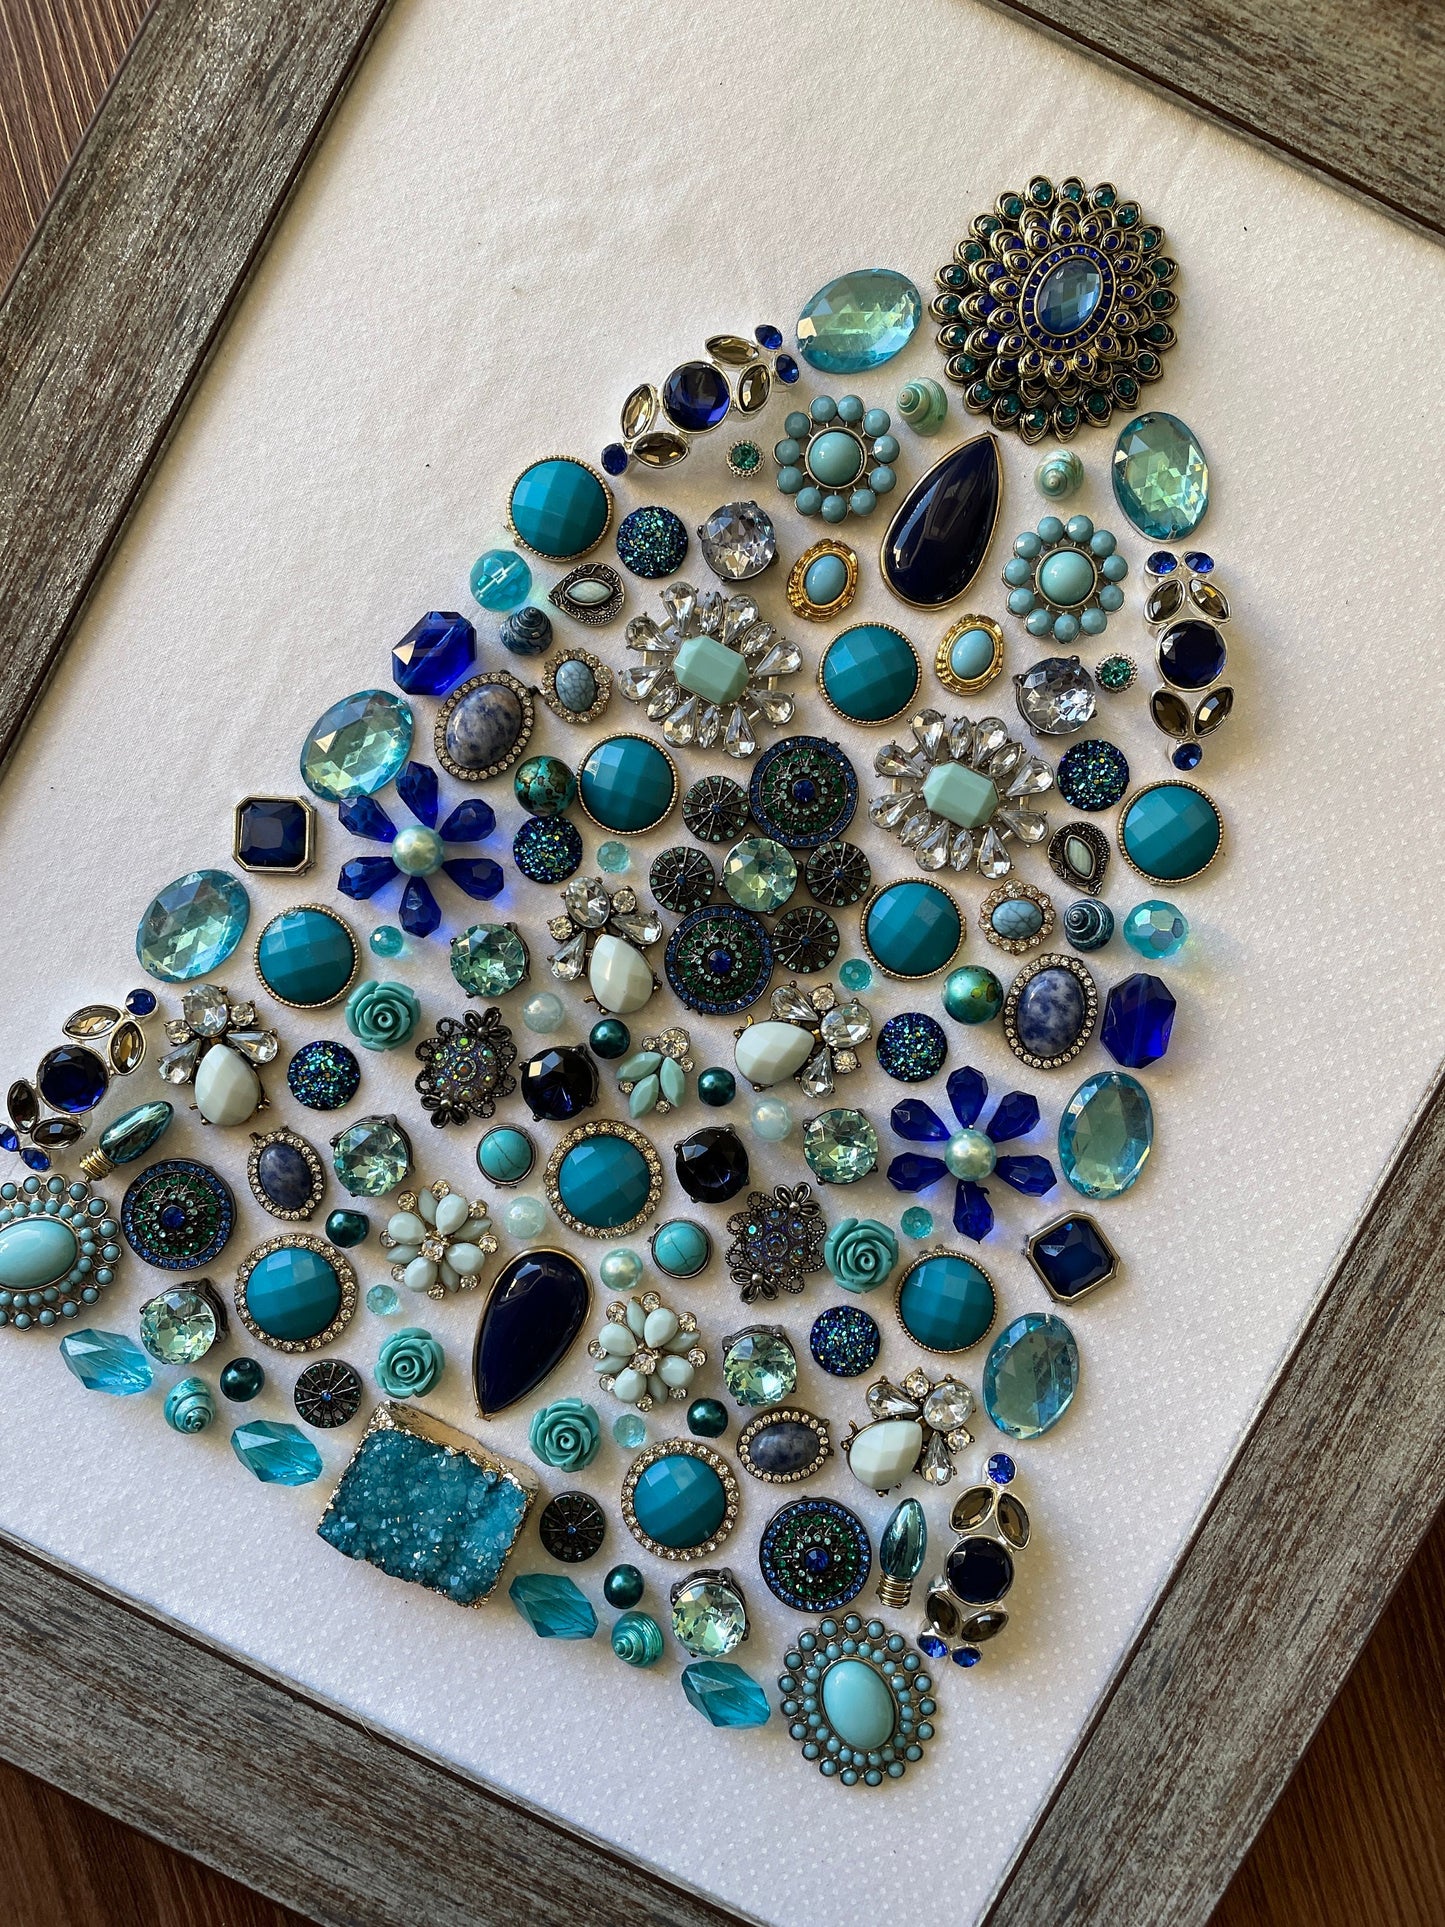 Blue, Silver, and Gray Framed Jewelry Christmas Tree Handmade with Over 60 Pieces of Vintage & Upcycled Jewelry